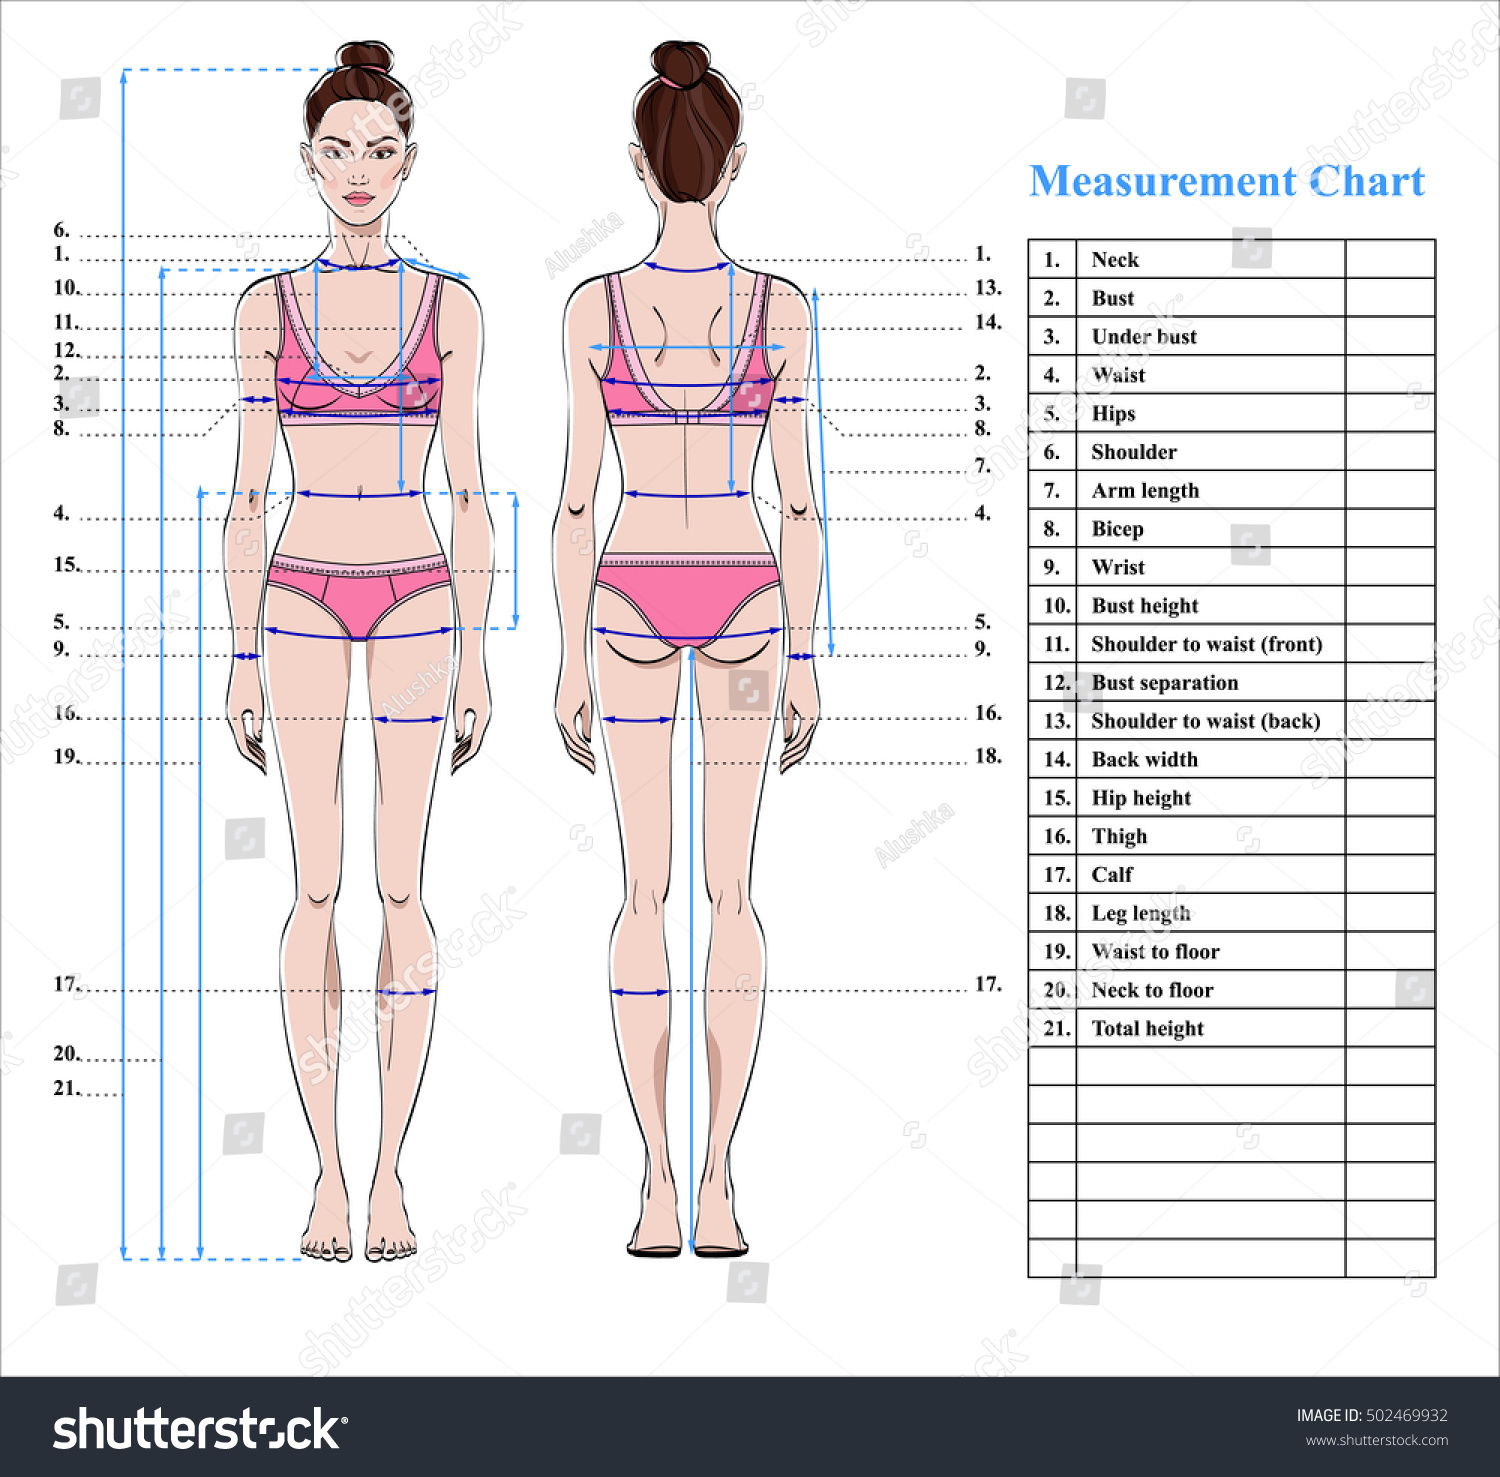 Woman Body Measurement Chart Scheme For Royalty Free Stock Vector 502469932 